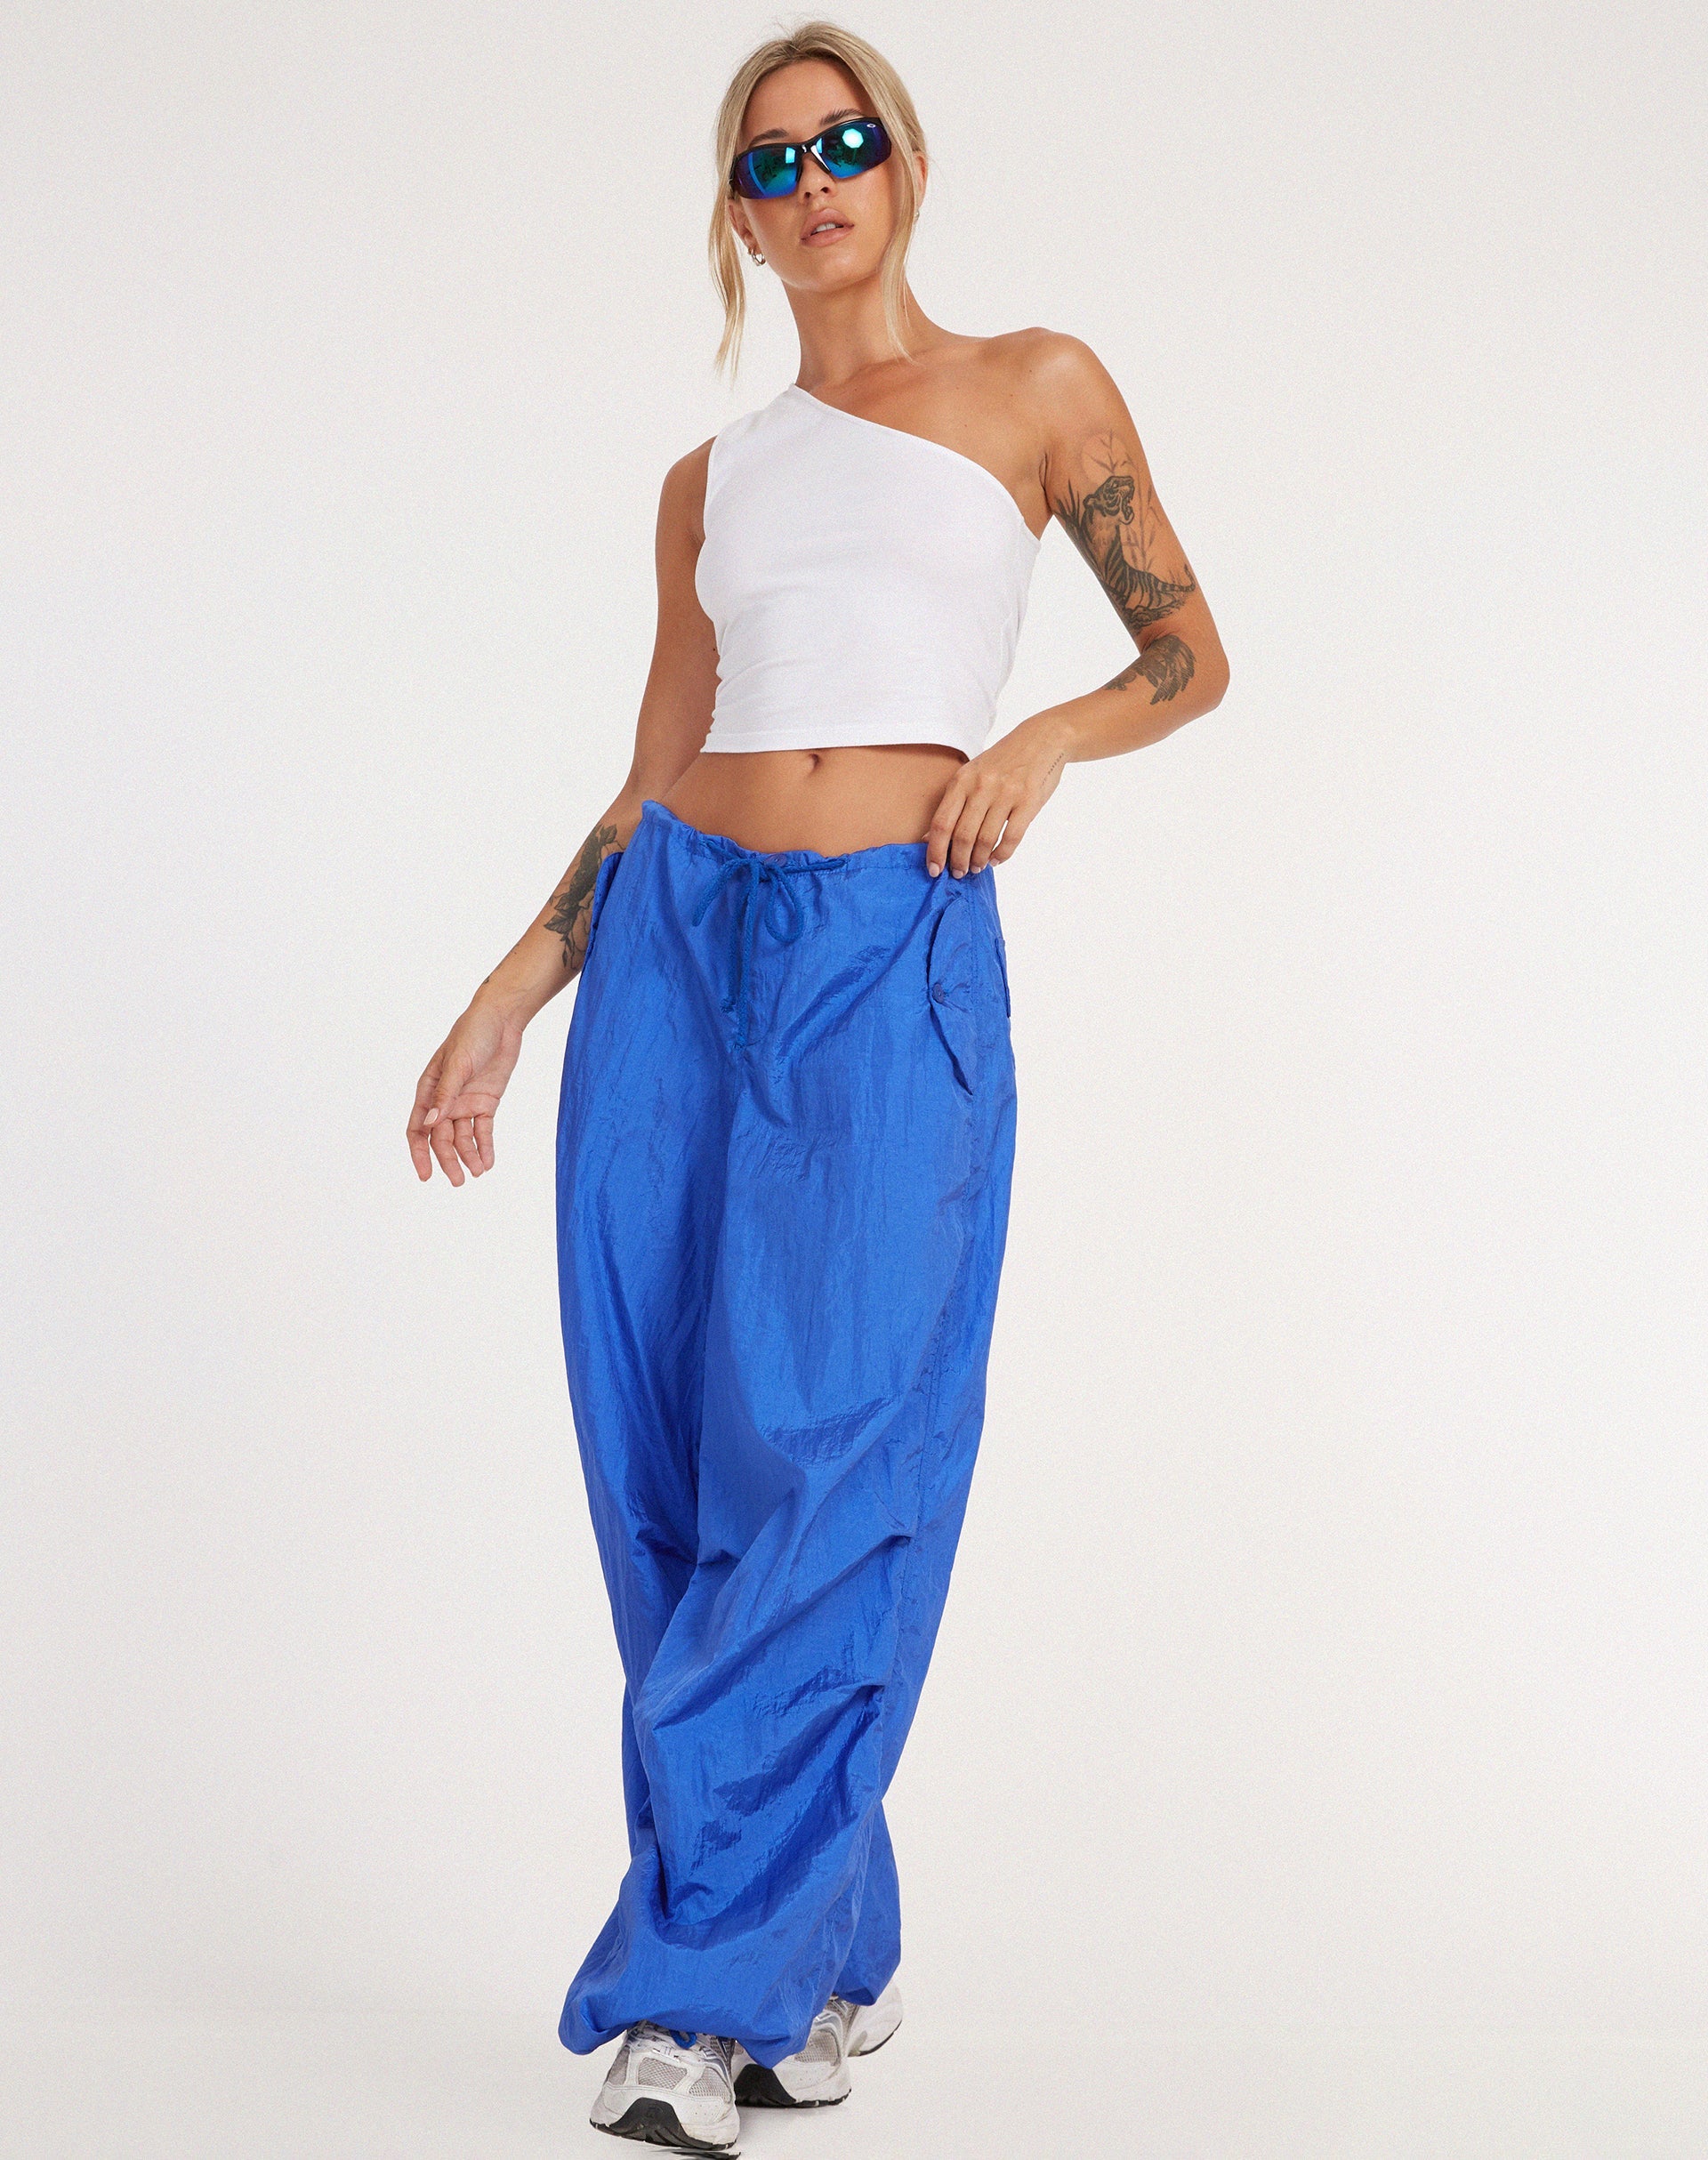 image of Chute Trouser in Cobalt Blue